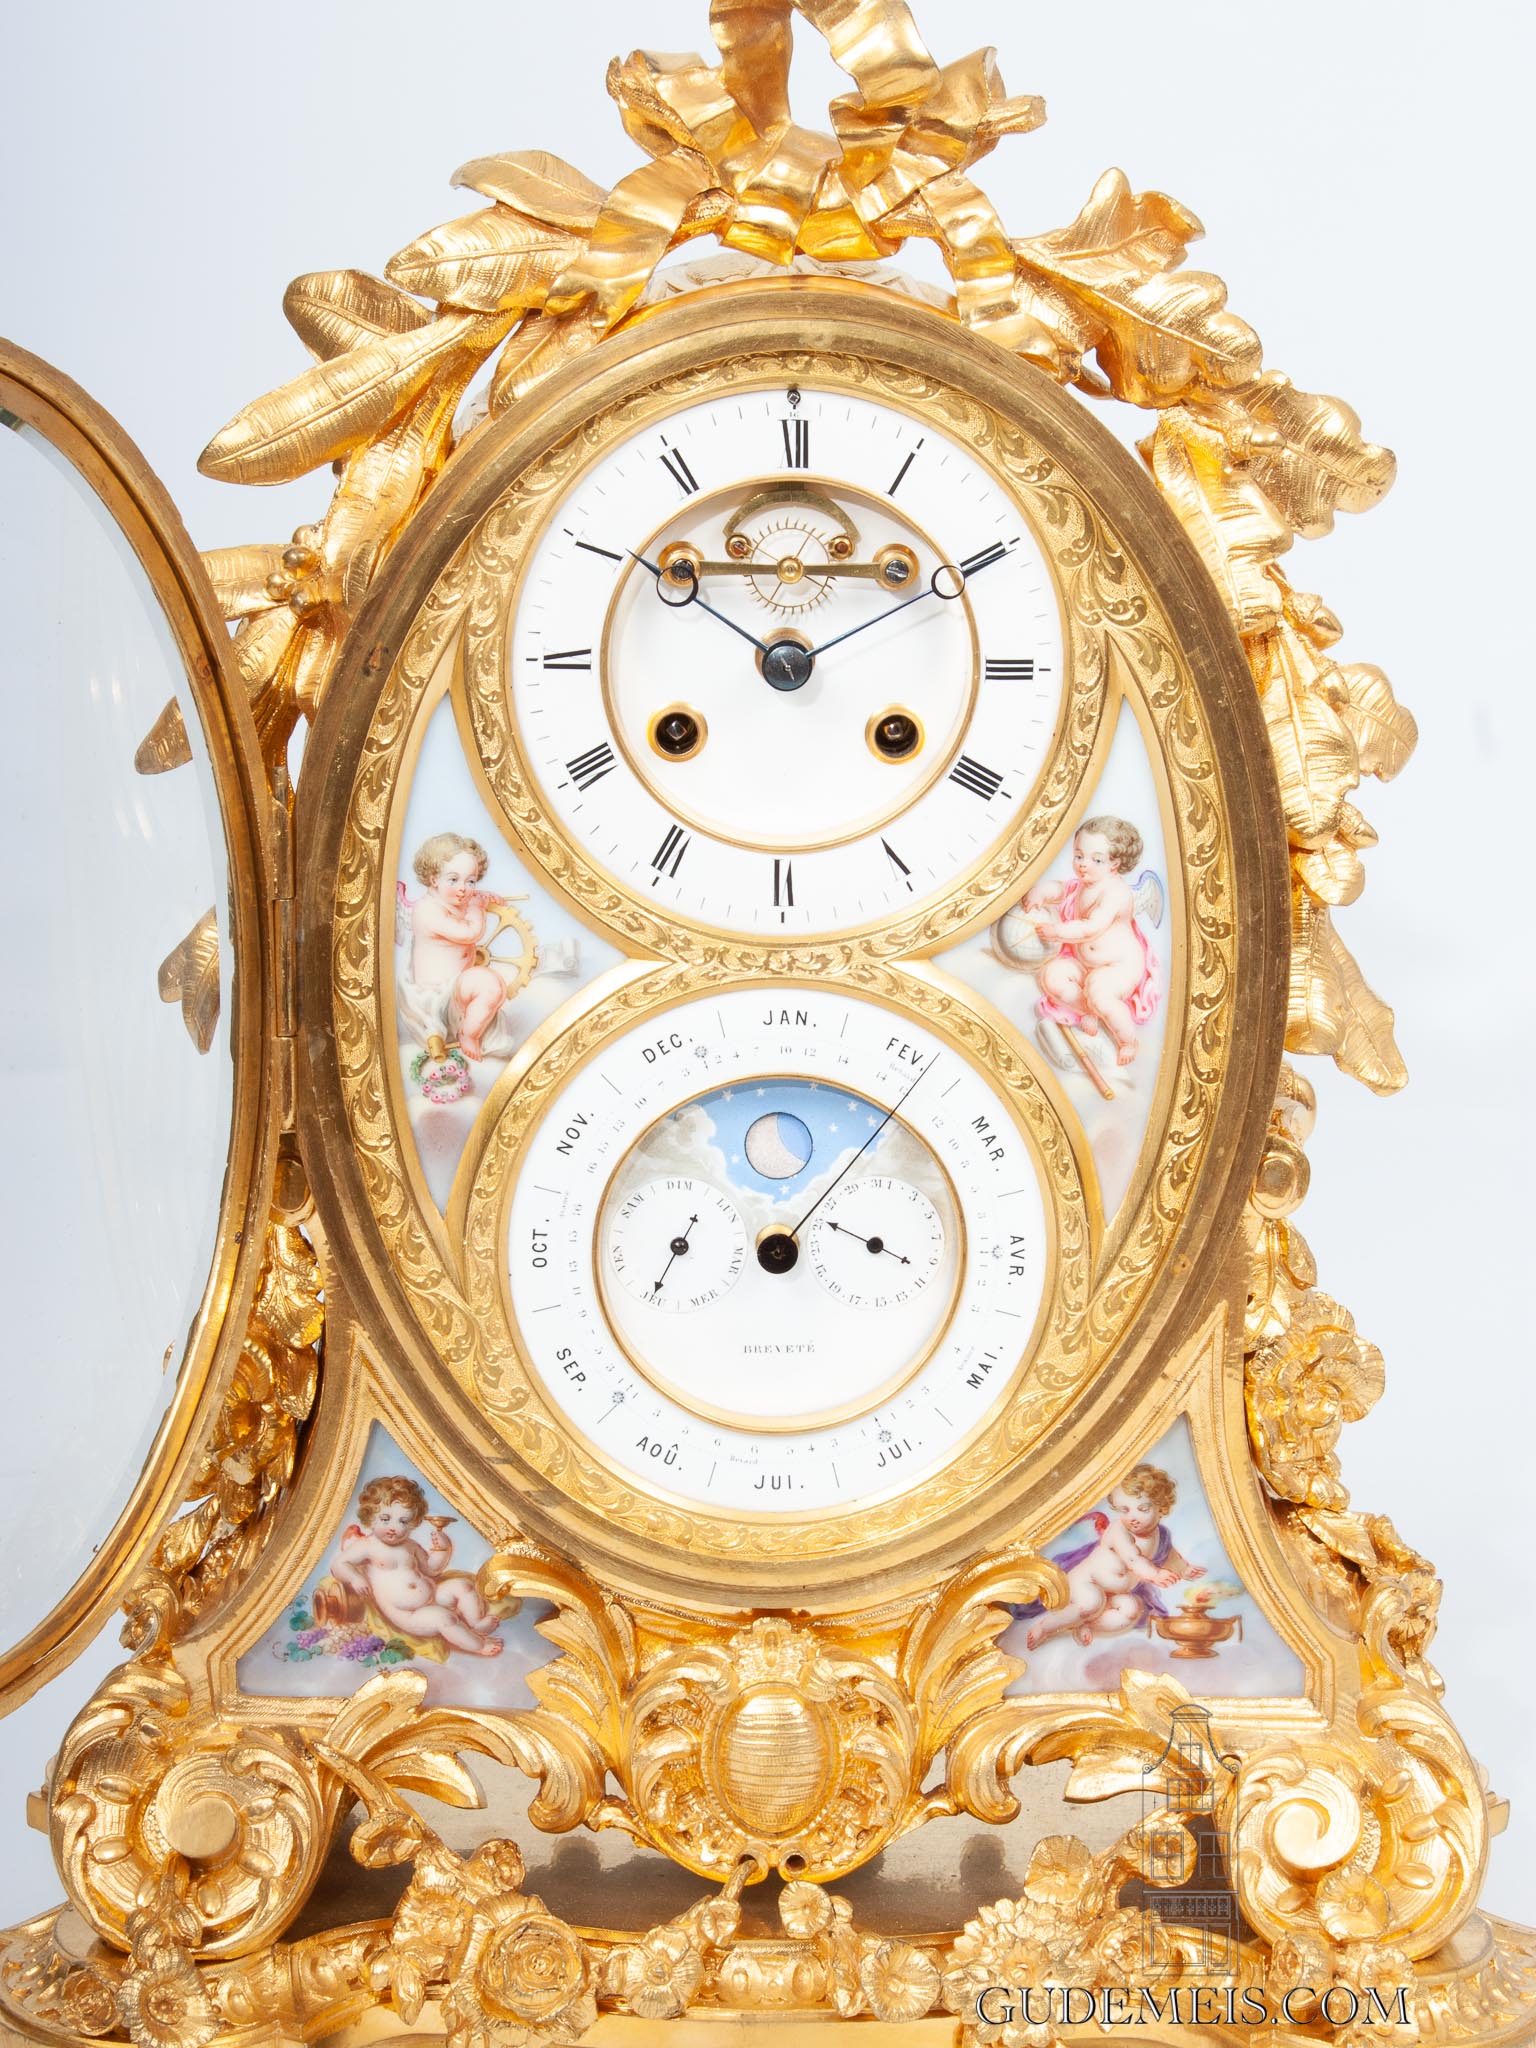 French-Napoleon III-rococo-style-sevres-porcelain-perpetual-calendar-moon phase-date-month-year-Brocot-antique-mantel-clock-